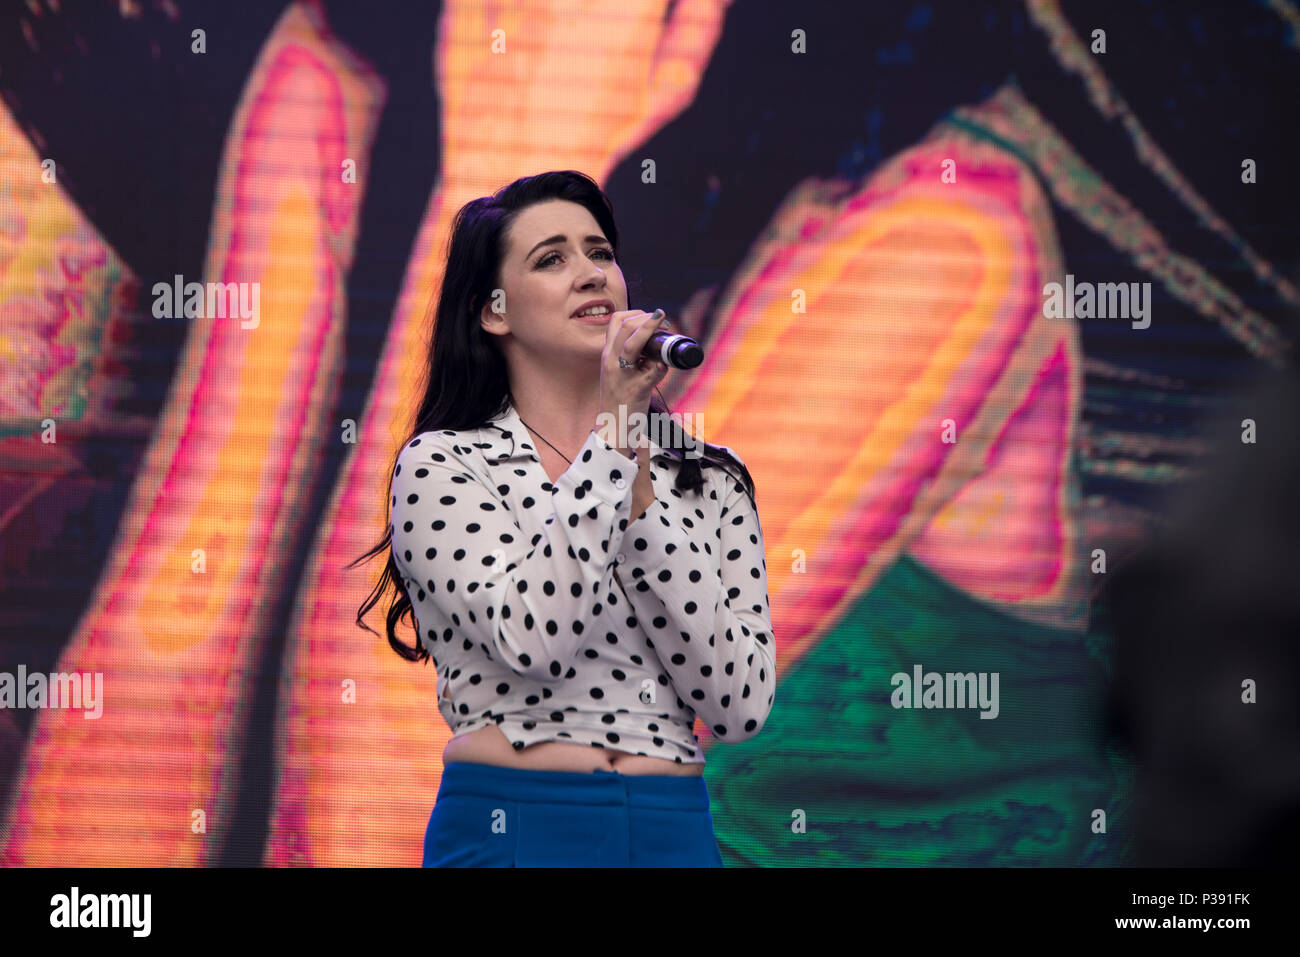 London, UK. 17th Jun, 2018. Danielle Hope on stage at West End Live on June 17 2018  in Trafalgar Square, London. Credit: See Li/Alamy Live News Stock Photo